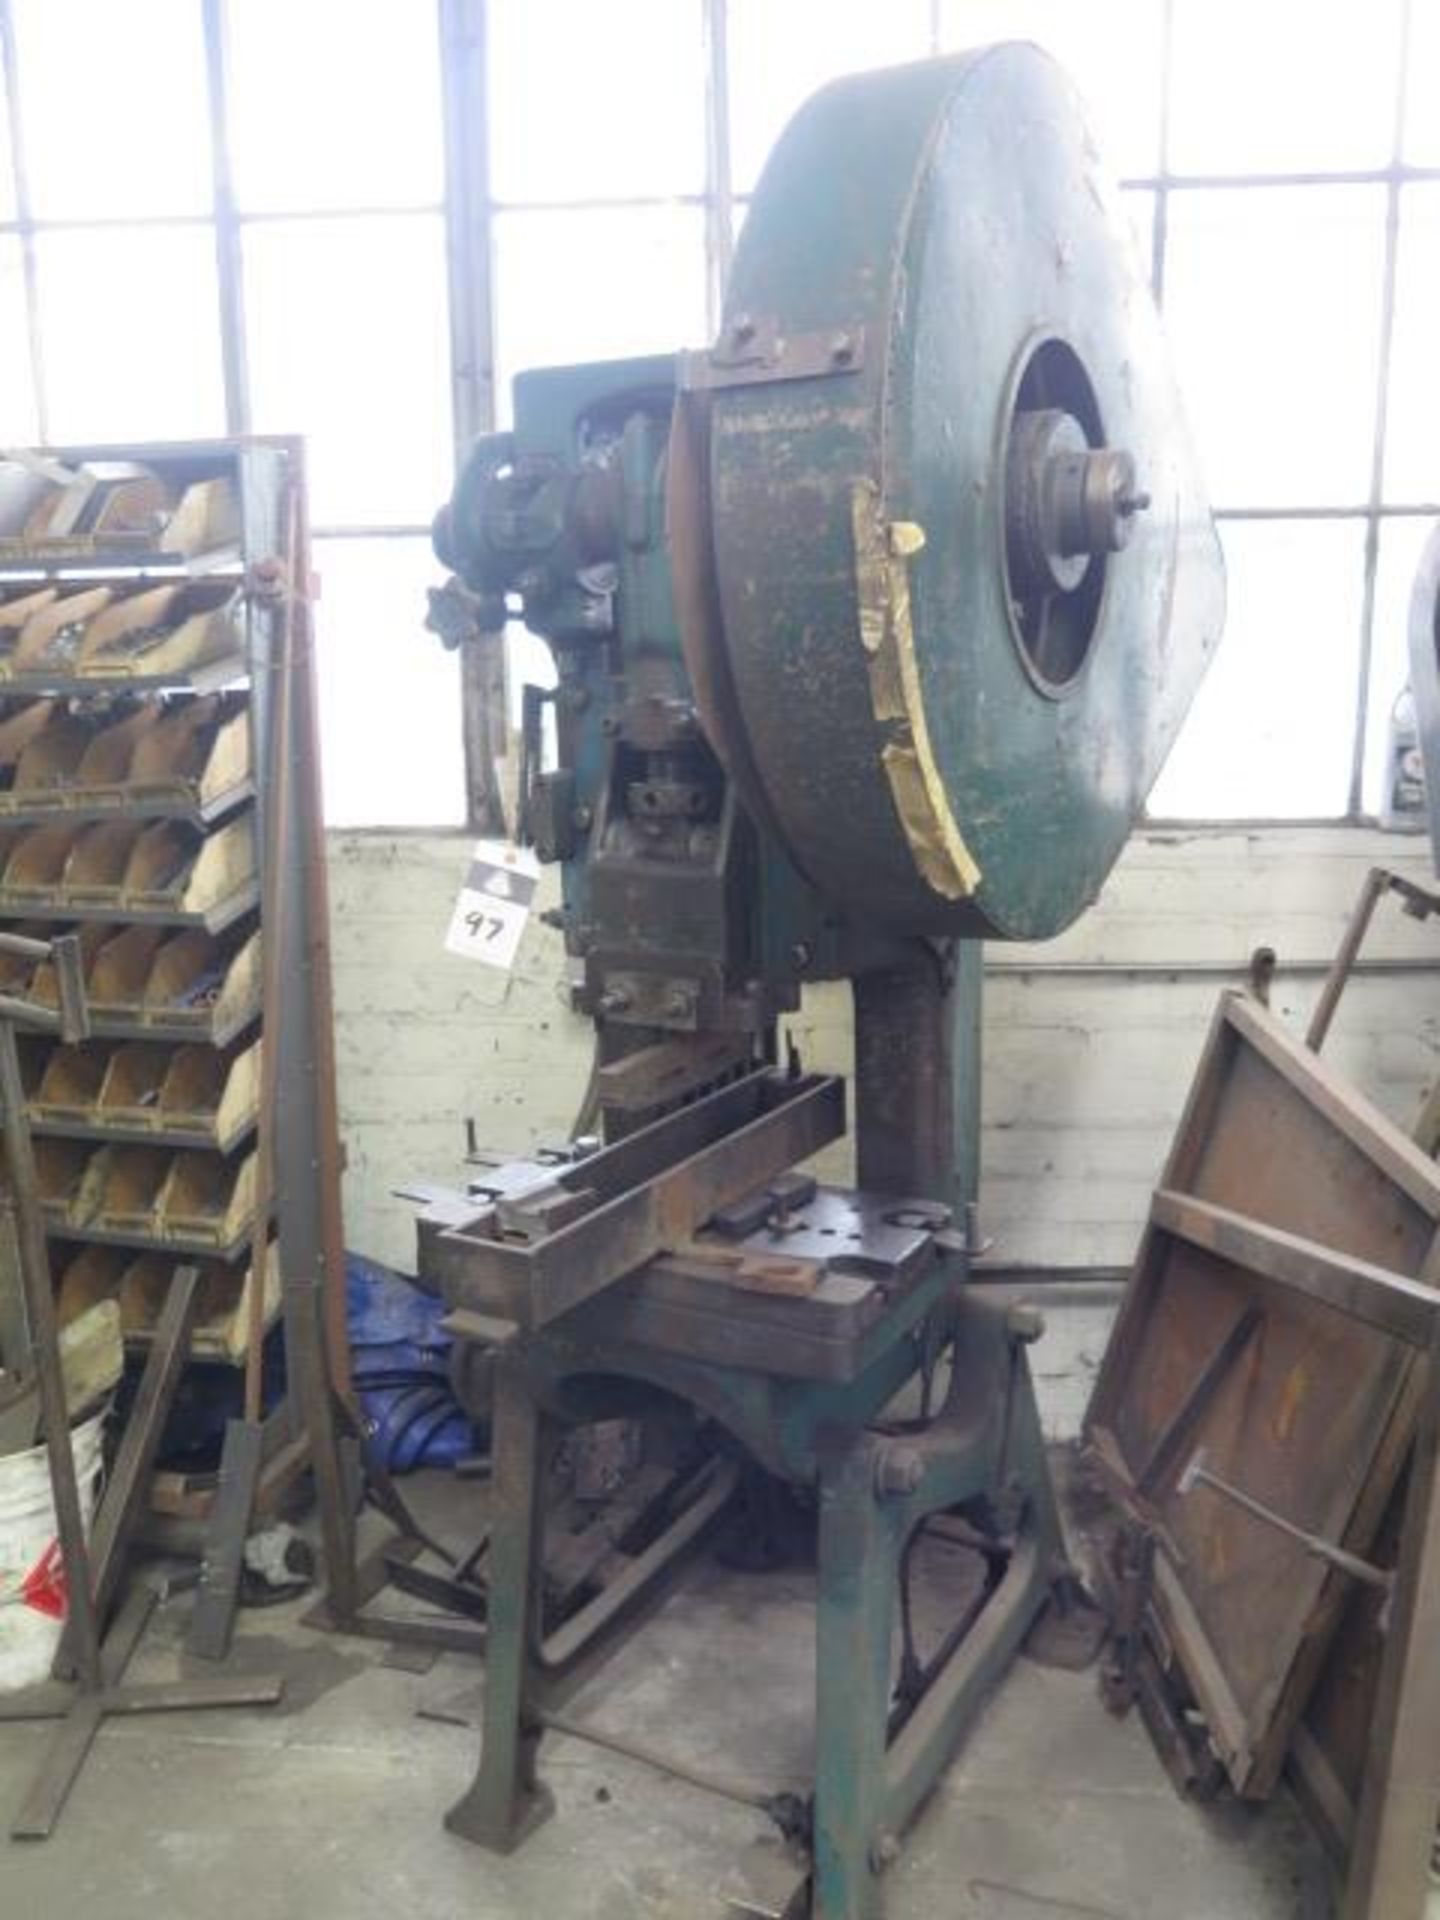 Perkins mdl.351B 20-Ton OBI Stamping Press (FOR PARTS ONLY) (SOLD AS-IS - NO WARRANTY) - Image 2 of 5